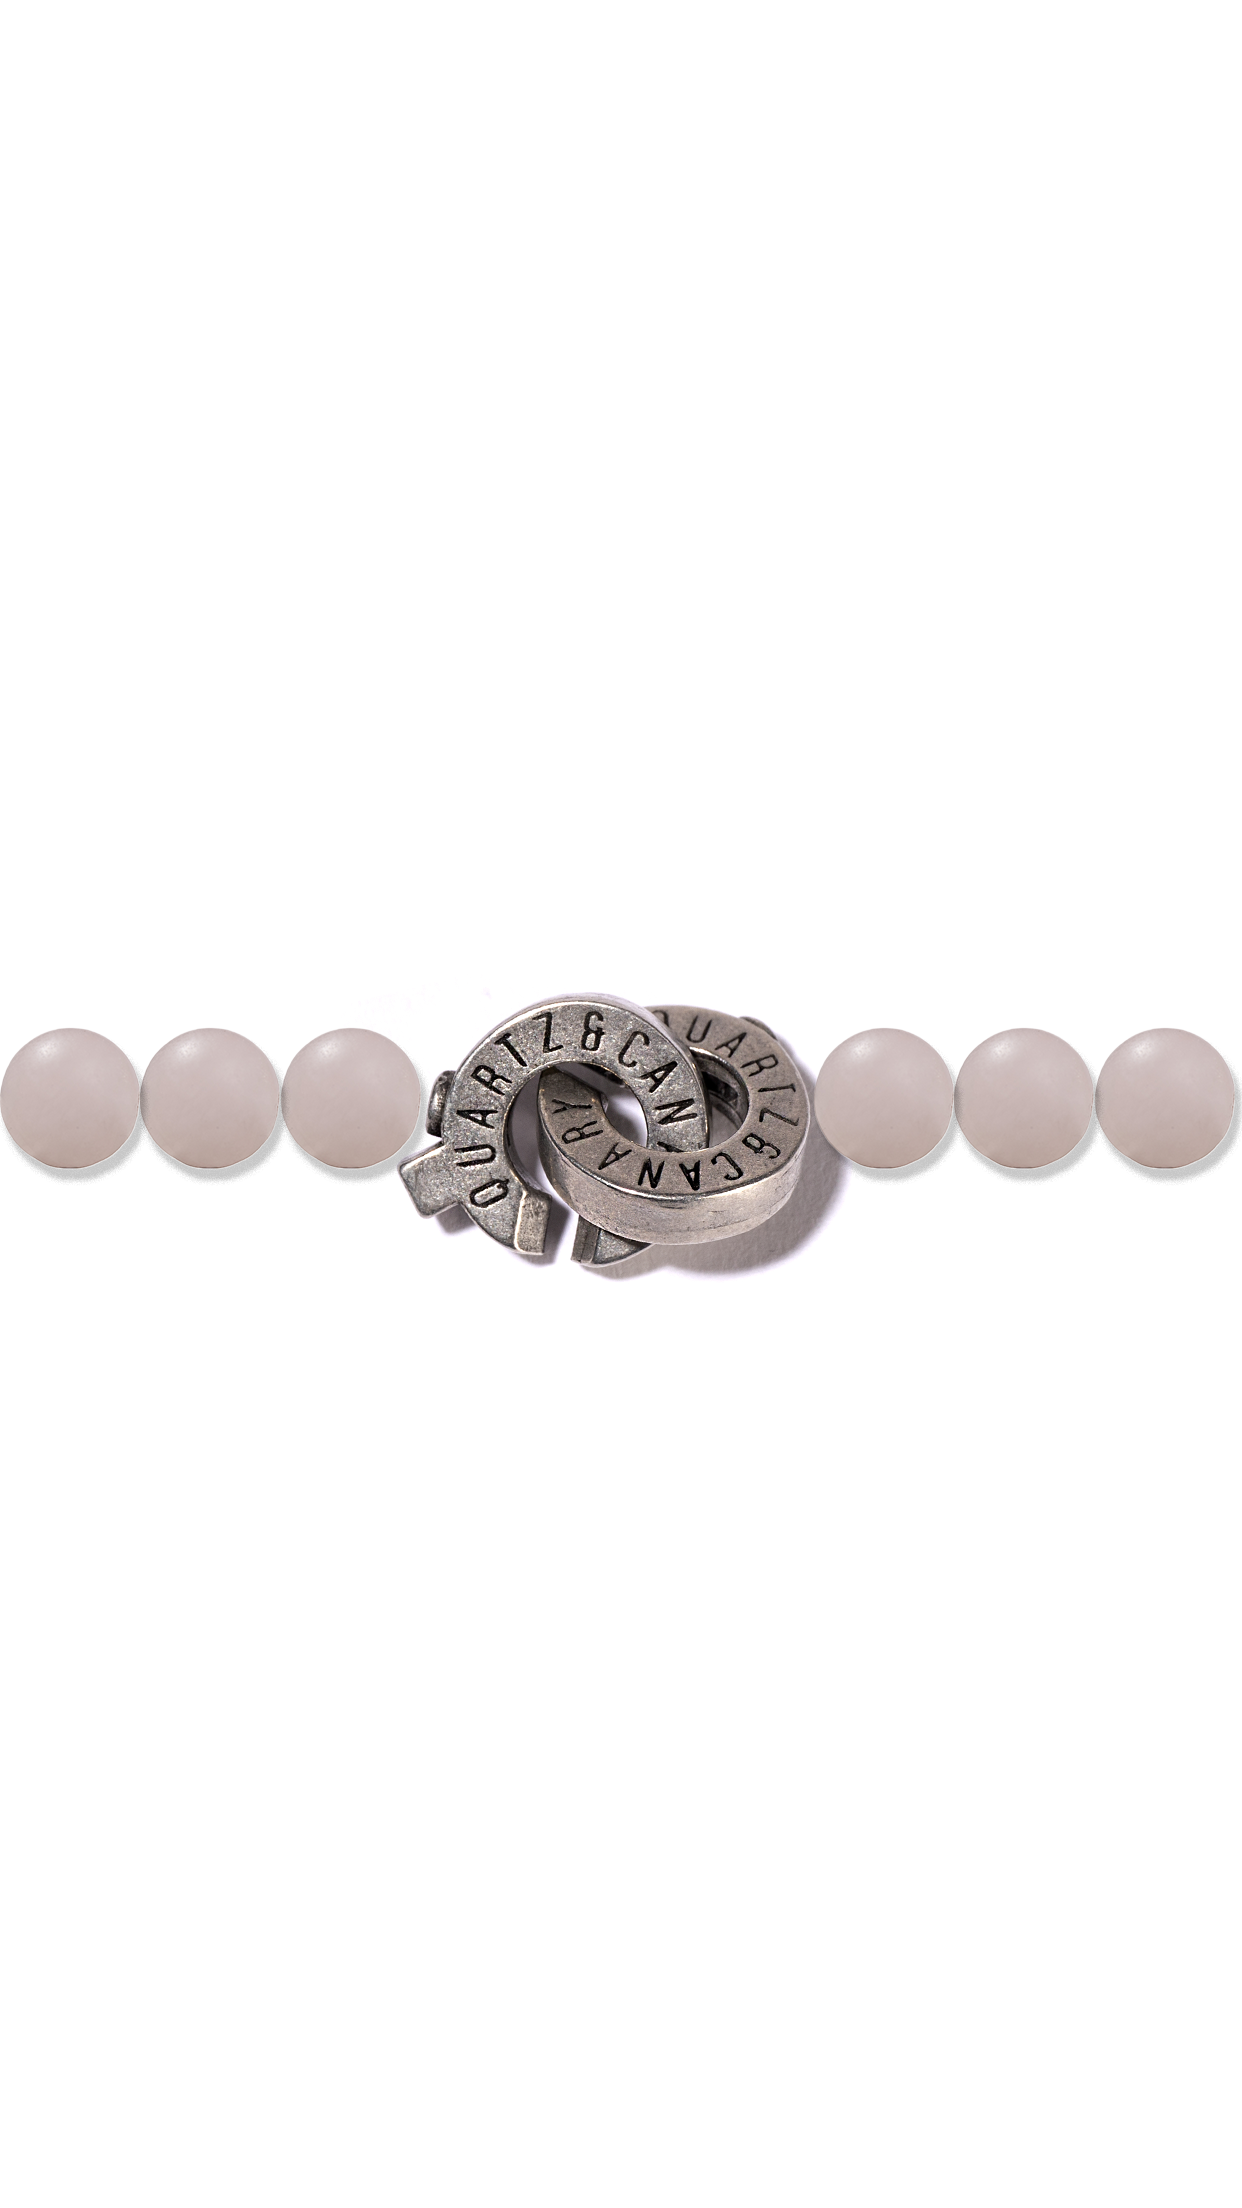 Connected Bracelet - Pewter Clasp (8mm)